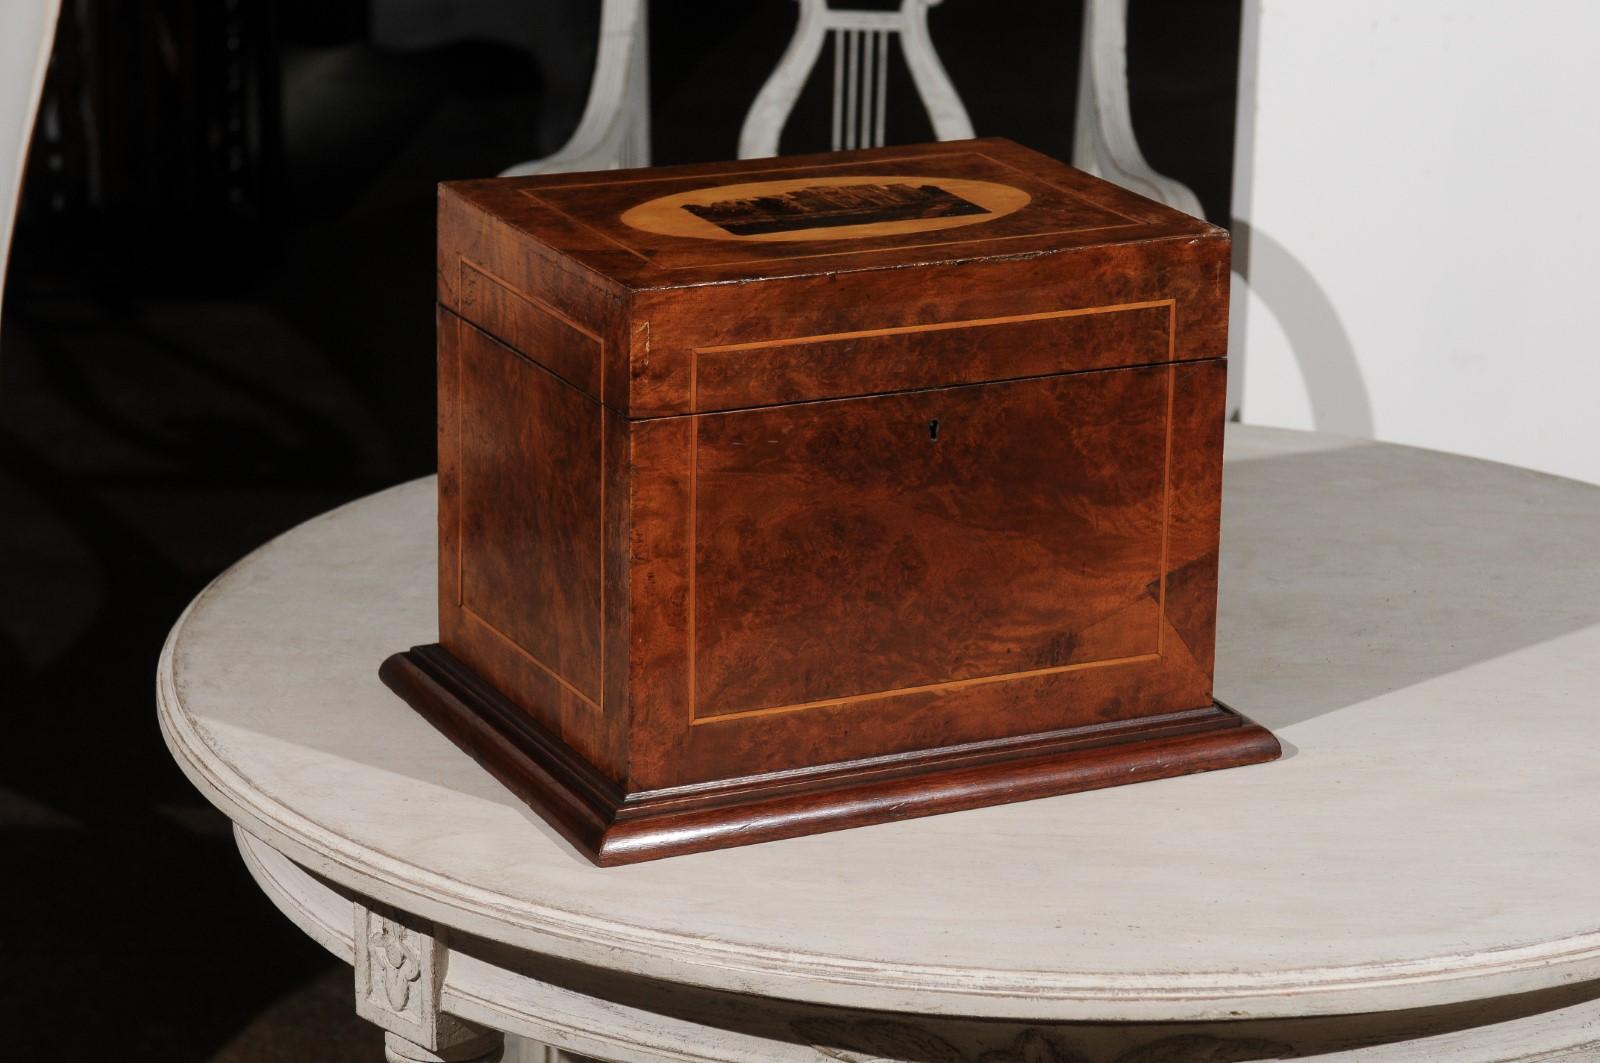 An English Tunbridge Ware dresser top jewelry box from the 19th century, with inlaid medieval castle décor and deep interior storage. This English jewelry box, typical of the Tunbridge ware production famous for its decorative inlaid woodwork,